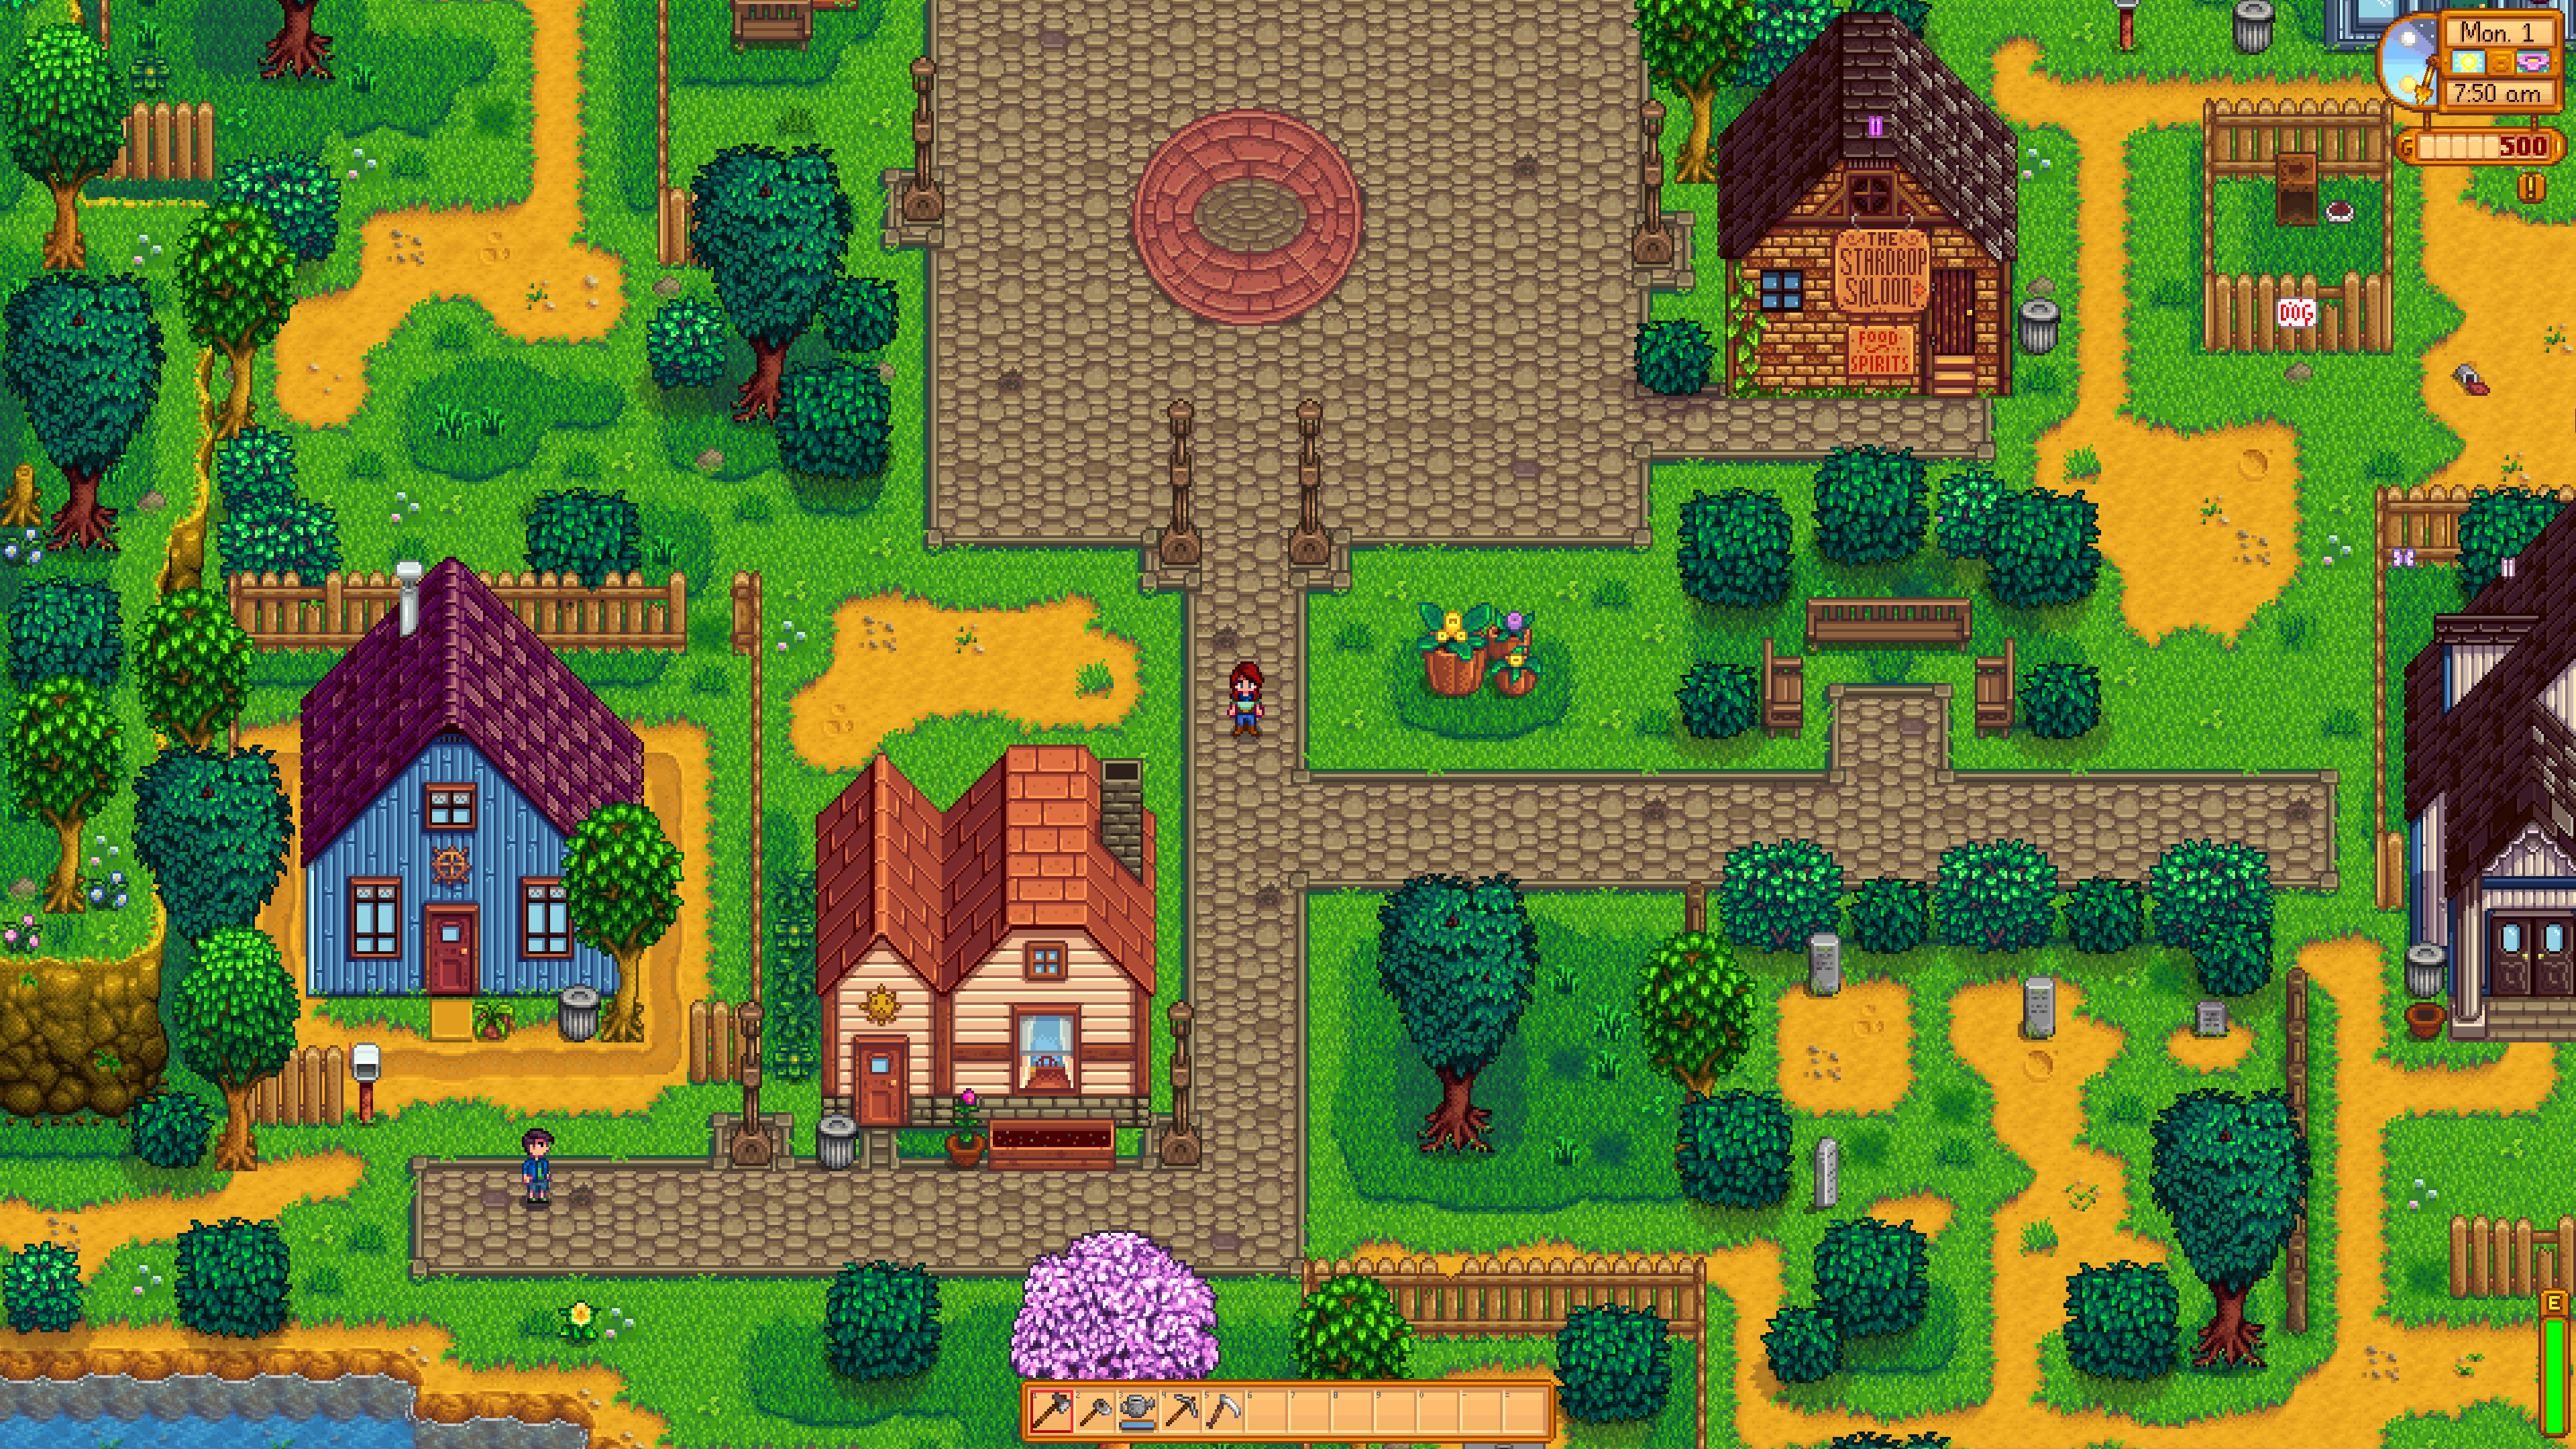 A screenshot from the game Stardew Valley of the main character in the middle of town